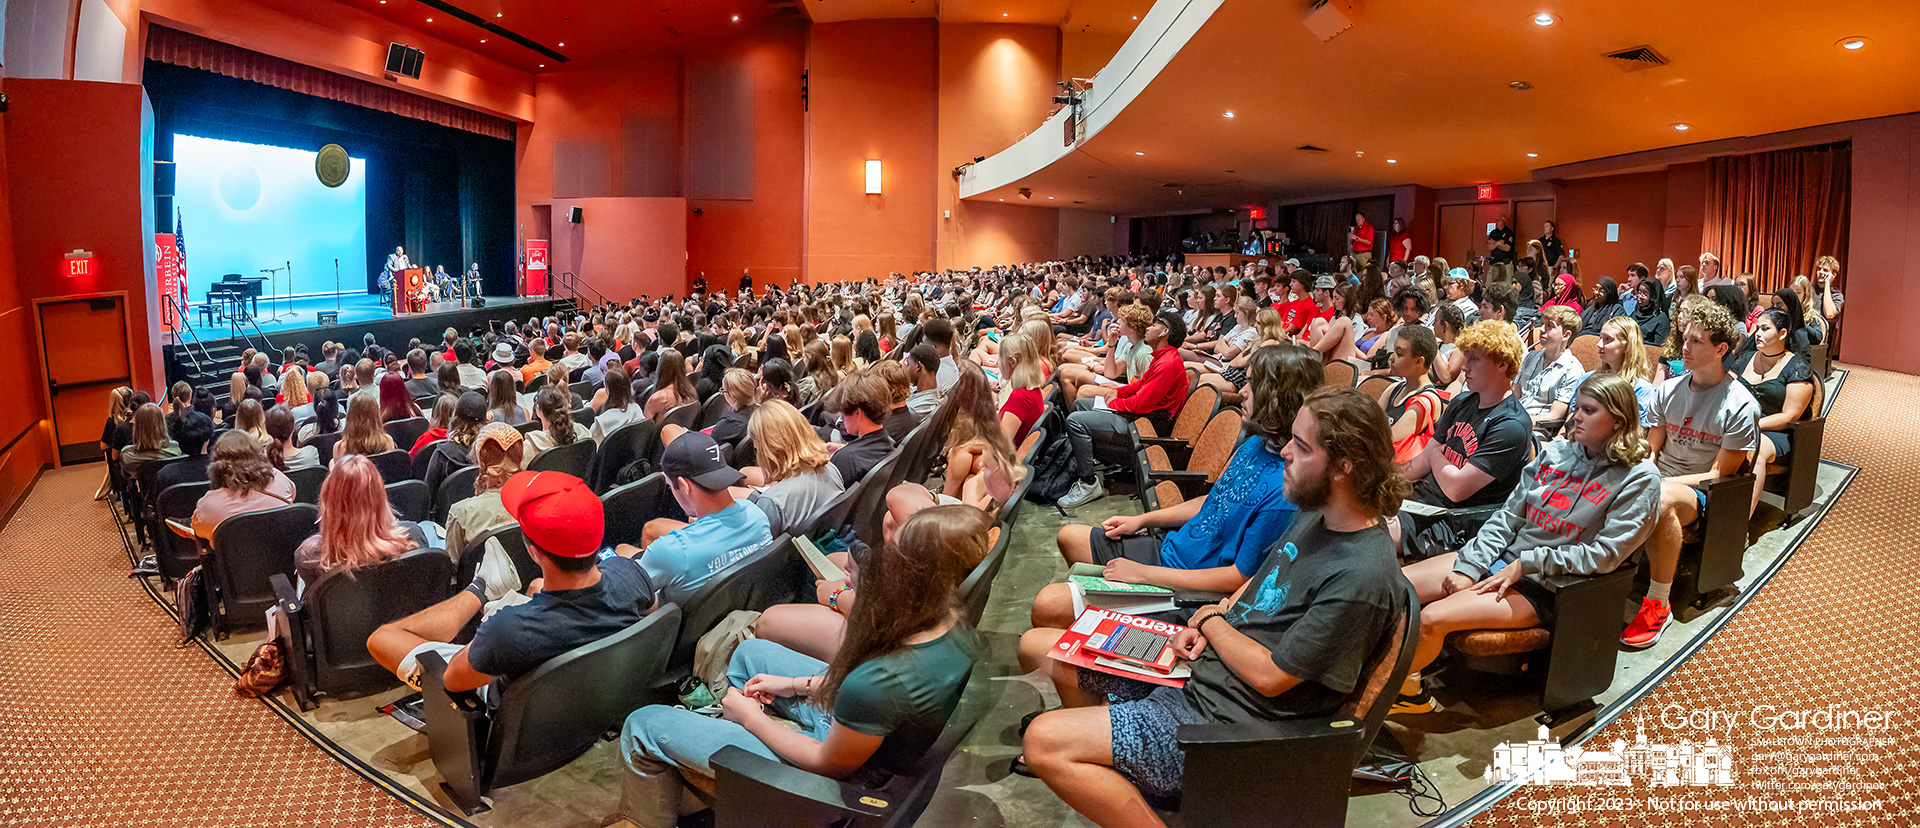 First-year-students at Otterbein University gather in Cowan Hall on their first full day at the school where they listened to the University president, provost and other speakers talk about their decision to attend the school. My Final Photo for August 17, 2023.